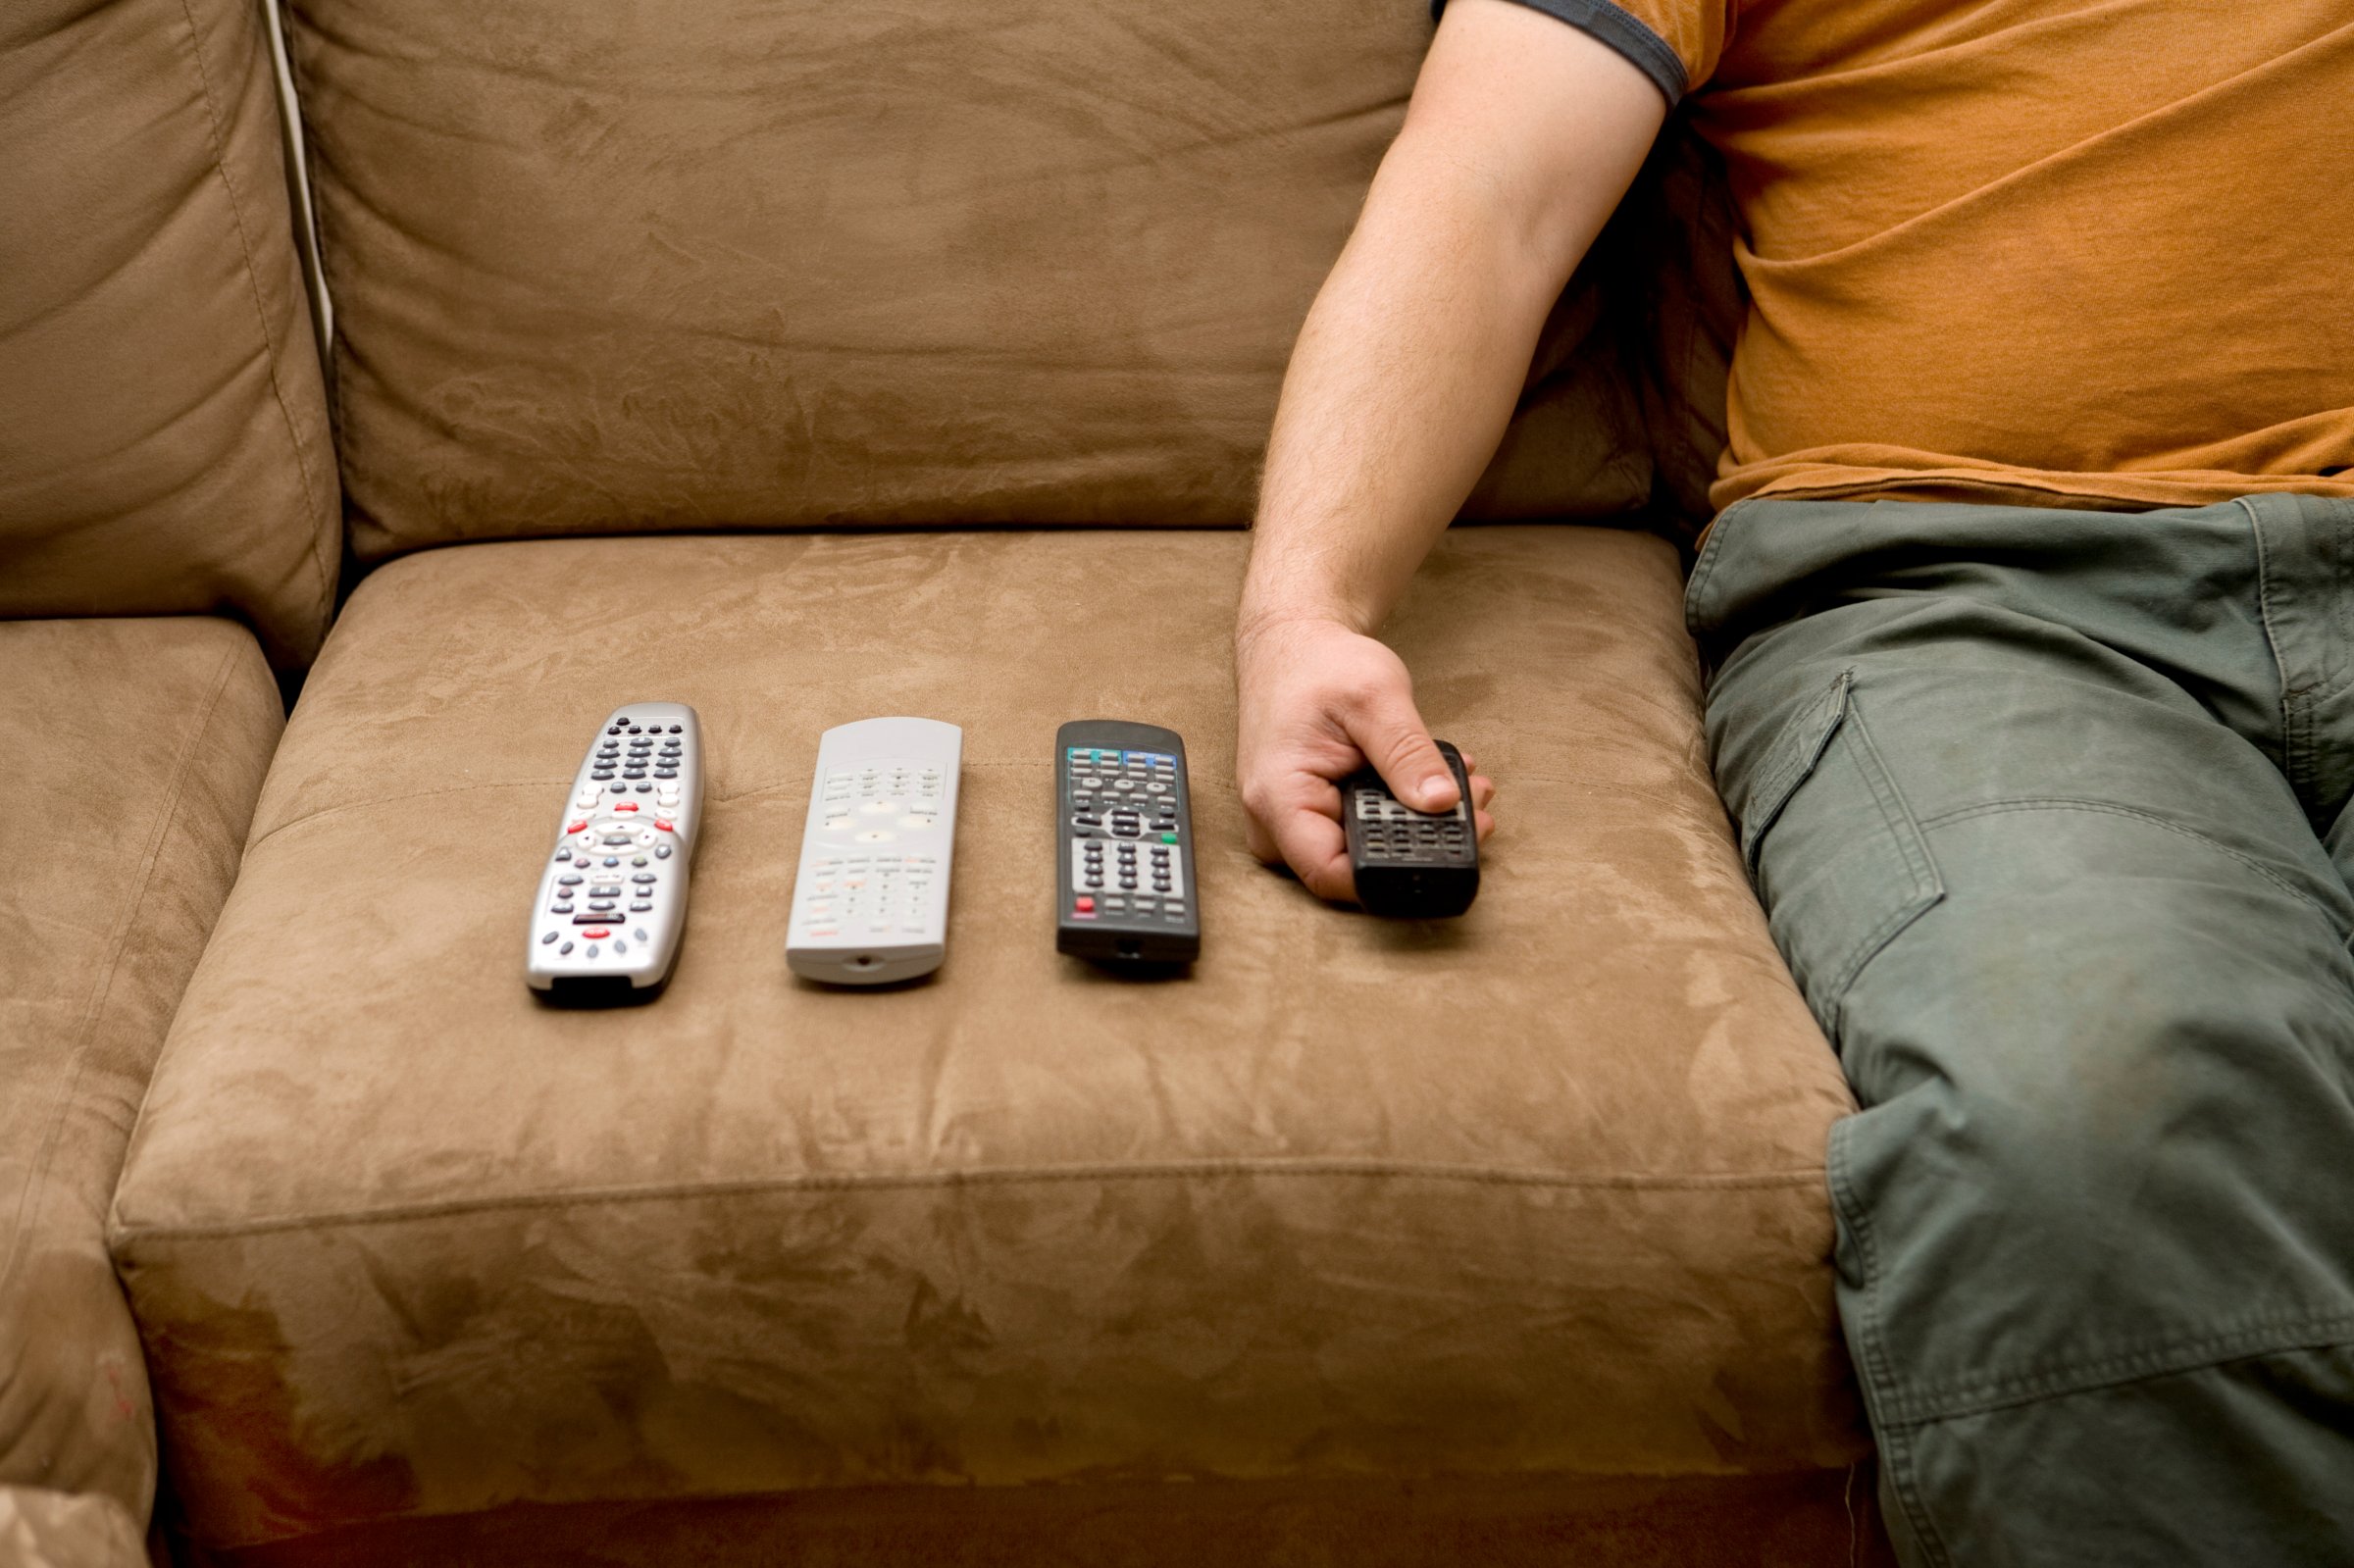 Overweight man using remote controls